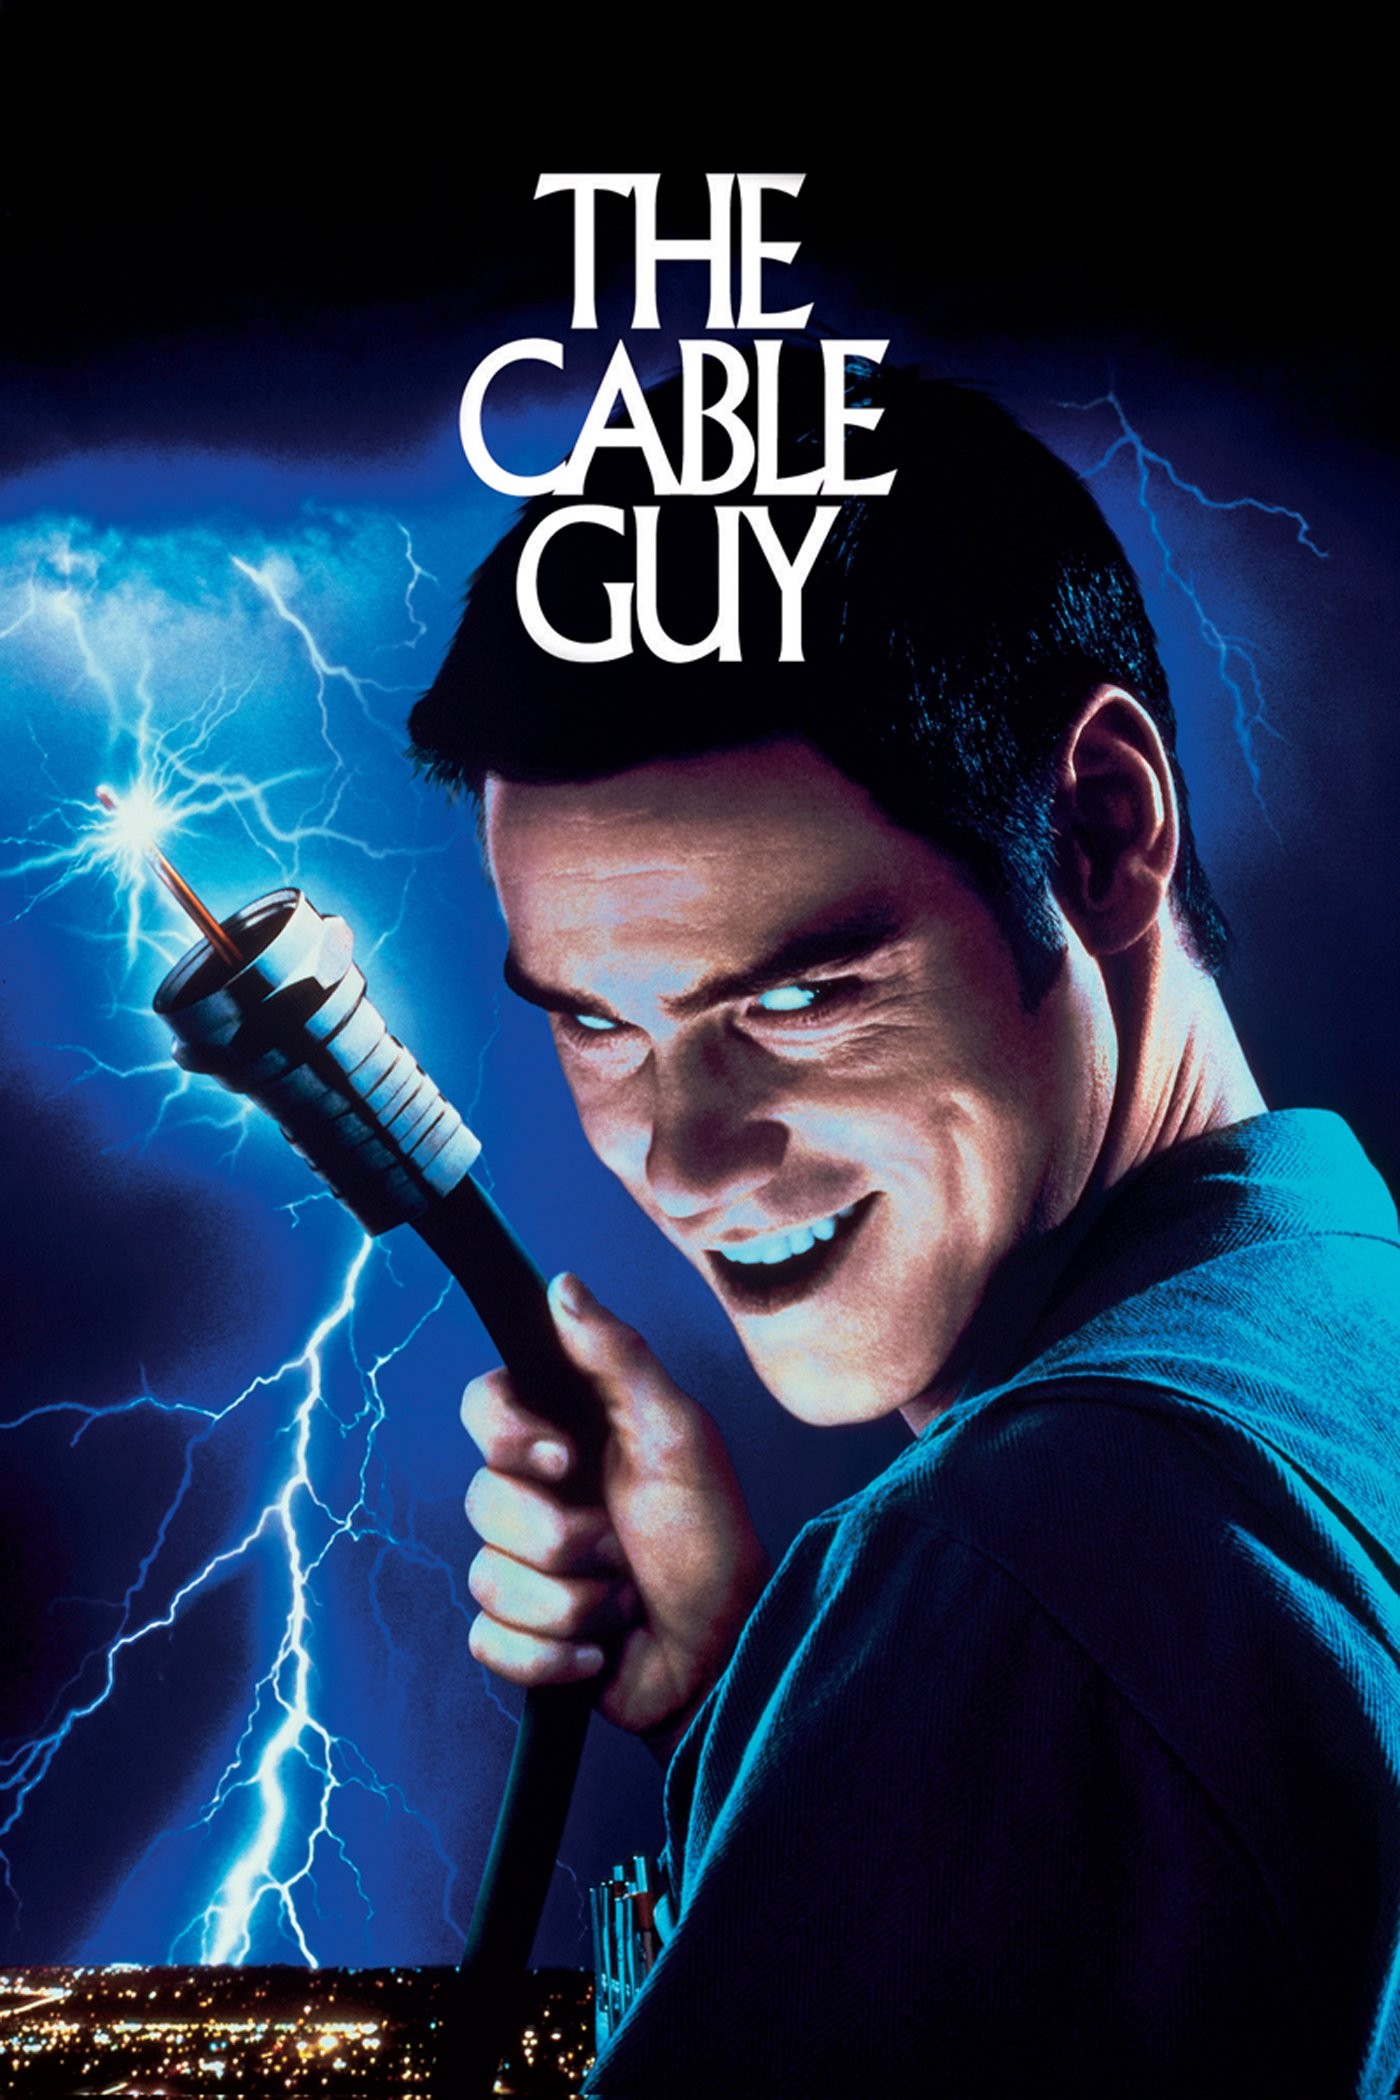 The cable guy 1996 torrent download hd